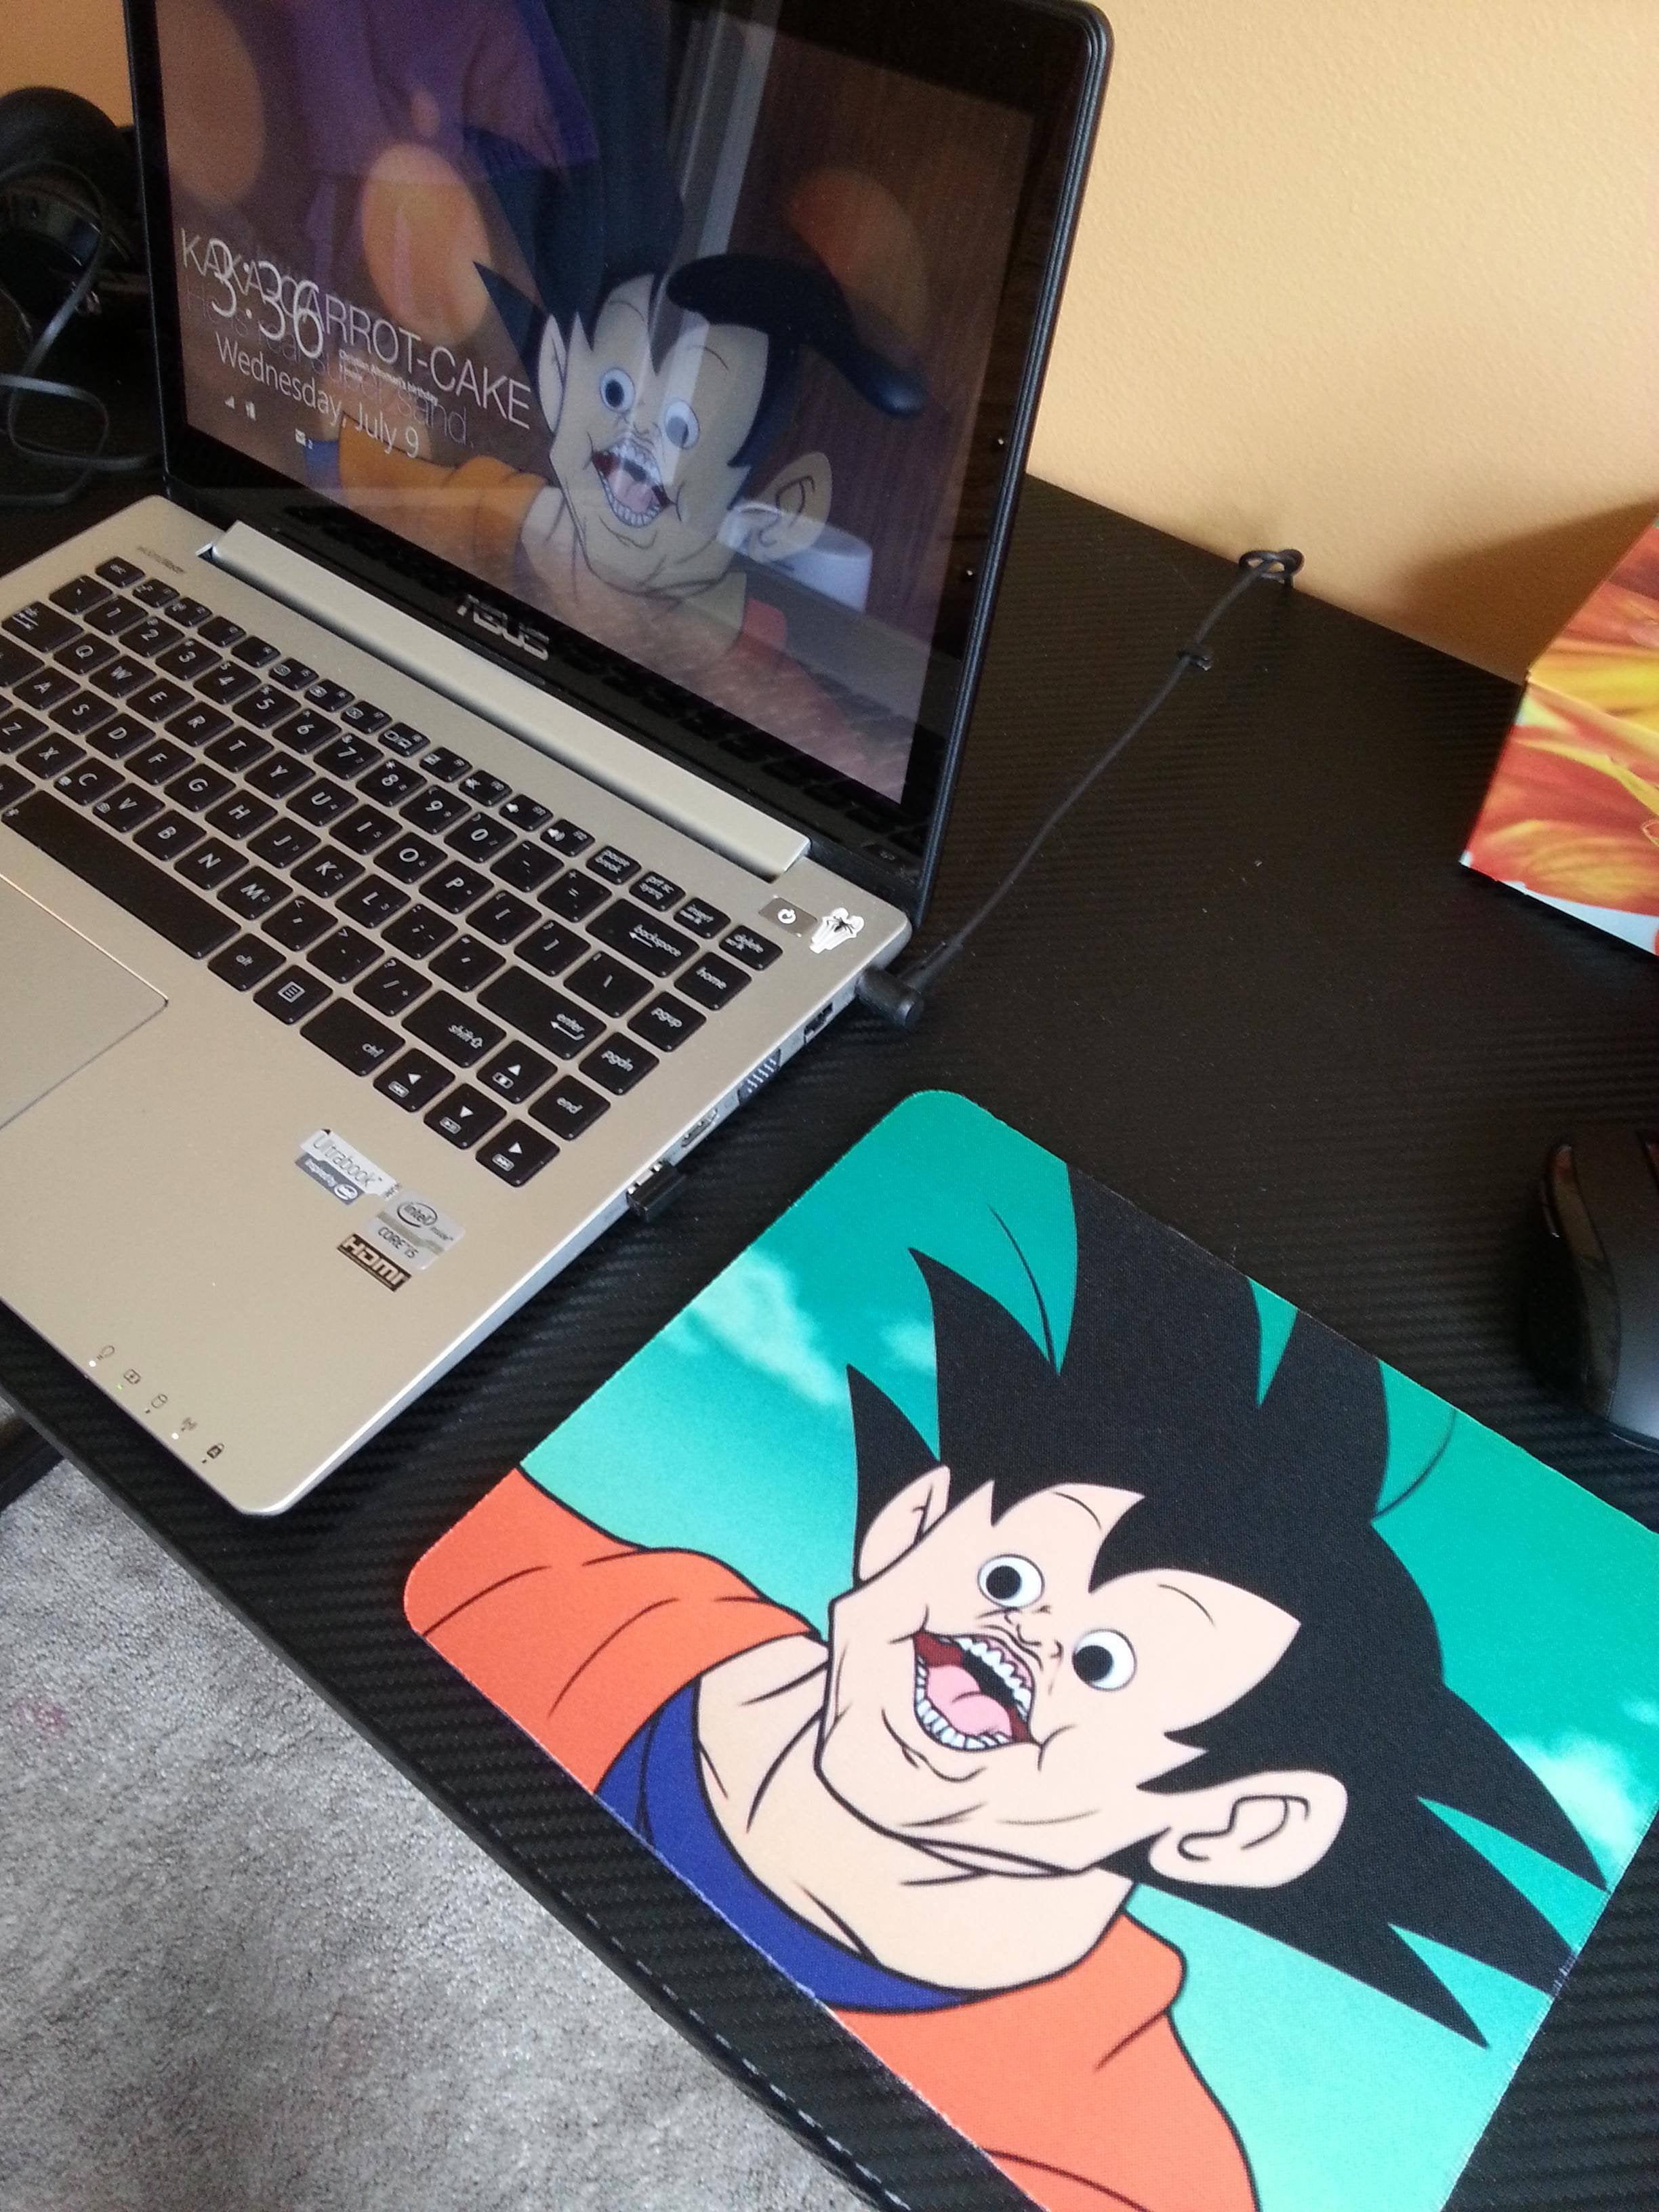 New c mouse pad to go with my wallpaper d rdbz